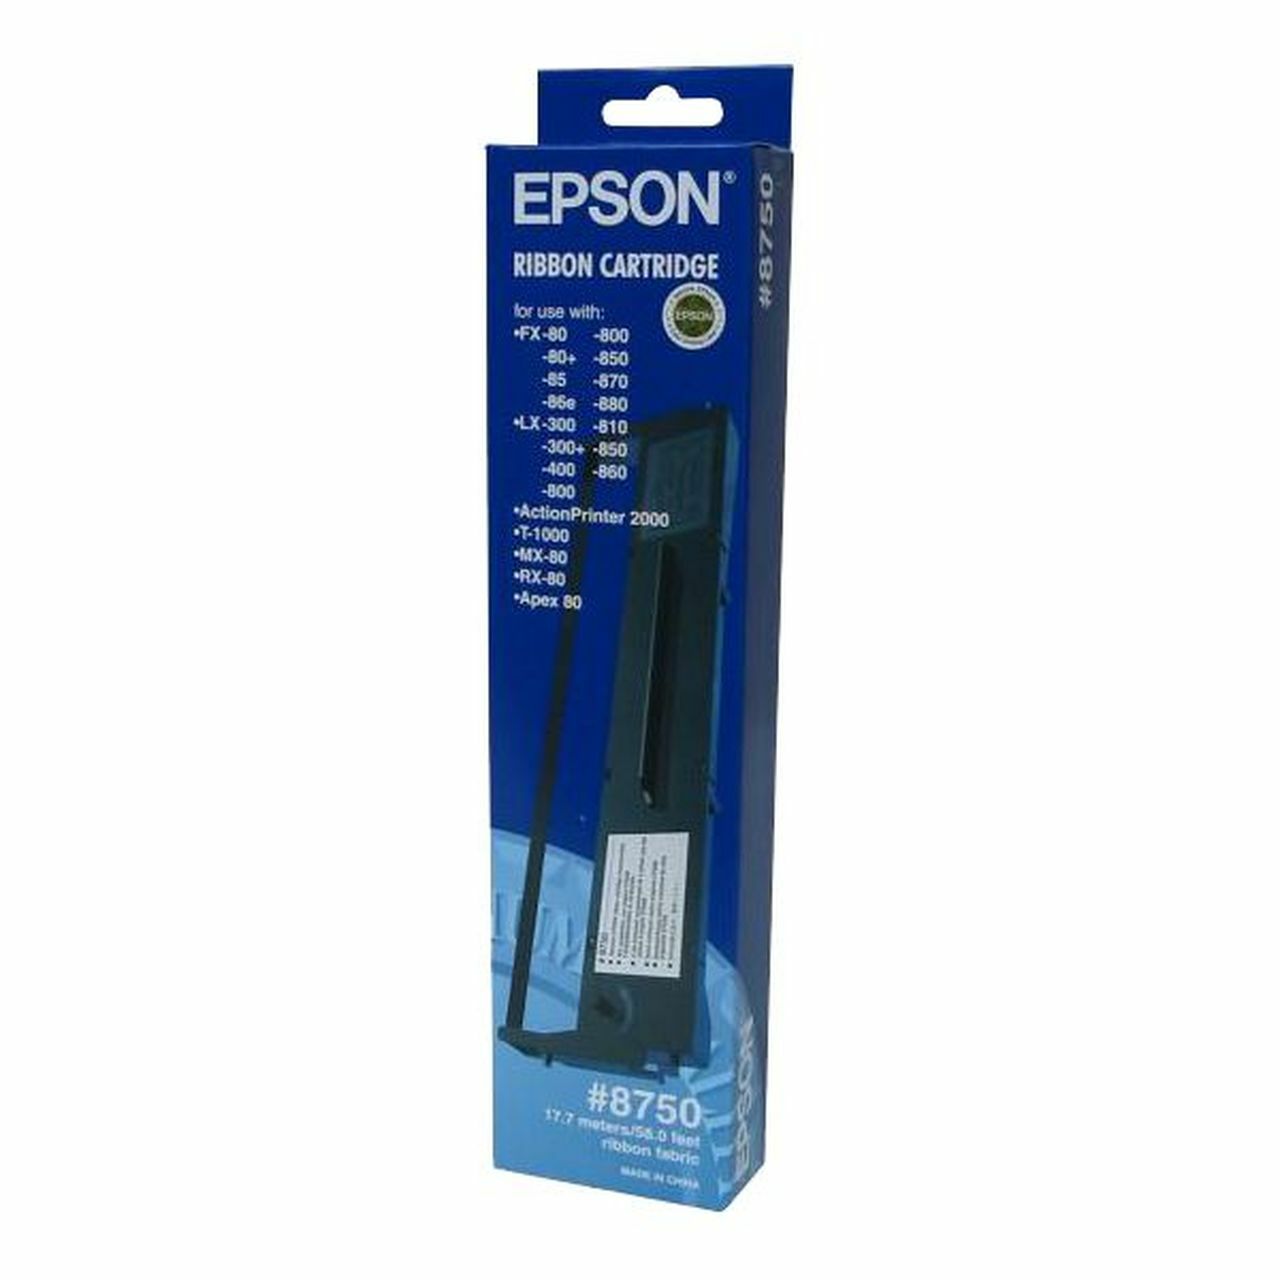 Compatible Cartridge for Epson MX-80